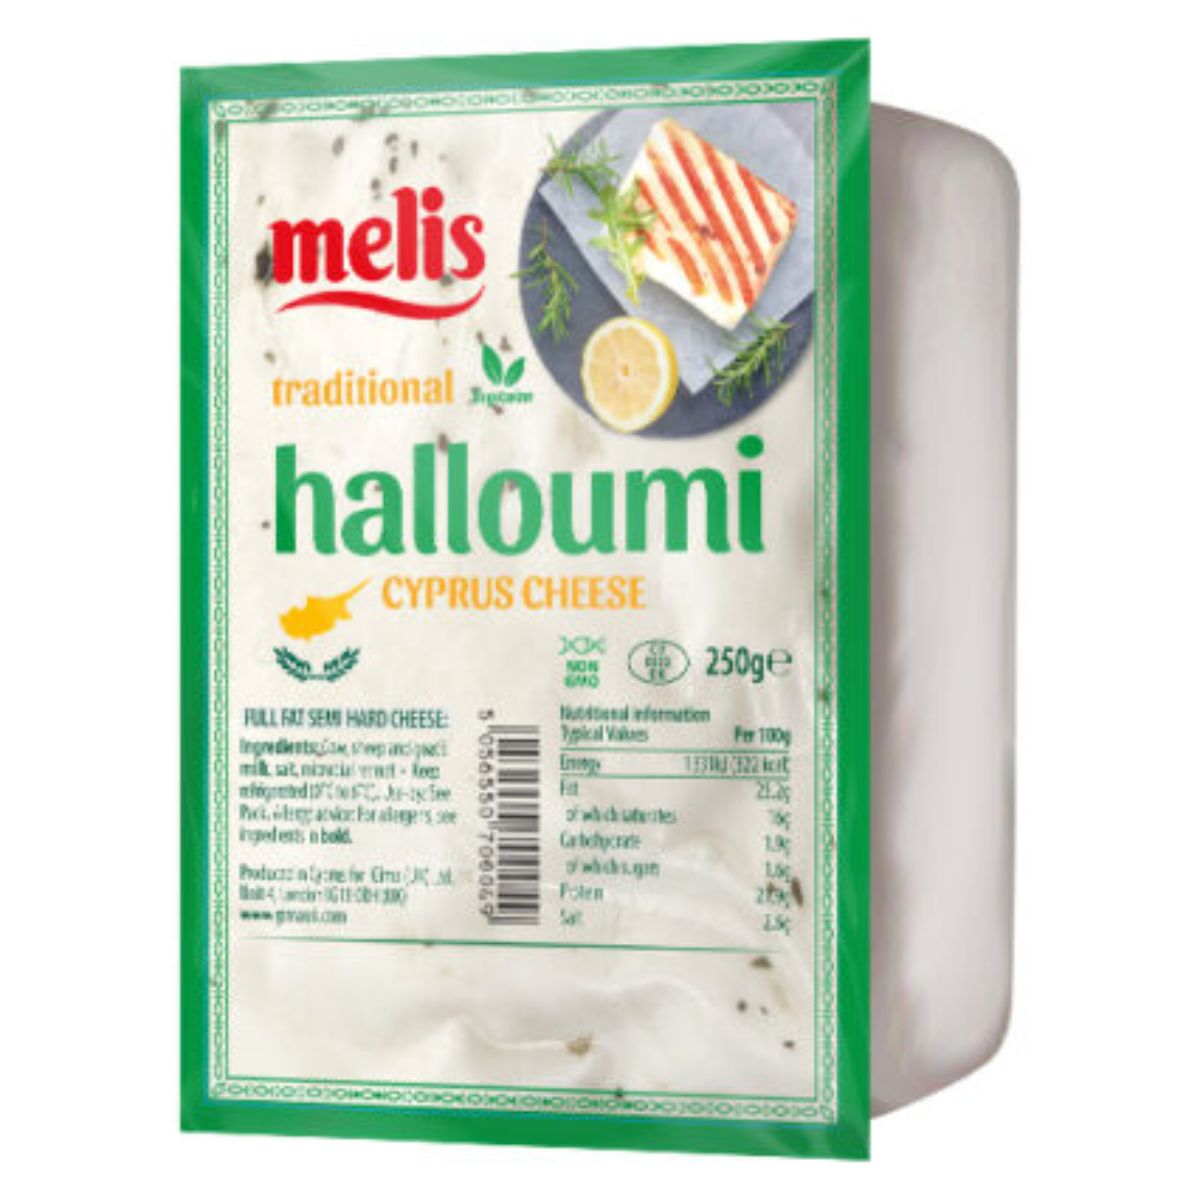 A package of Melis - Halloumi Cyprus Cheese - 250g on a white background.